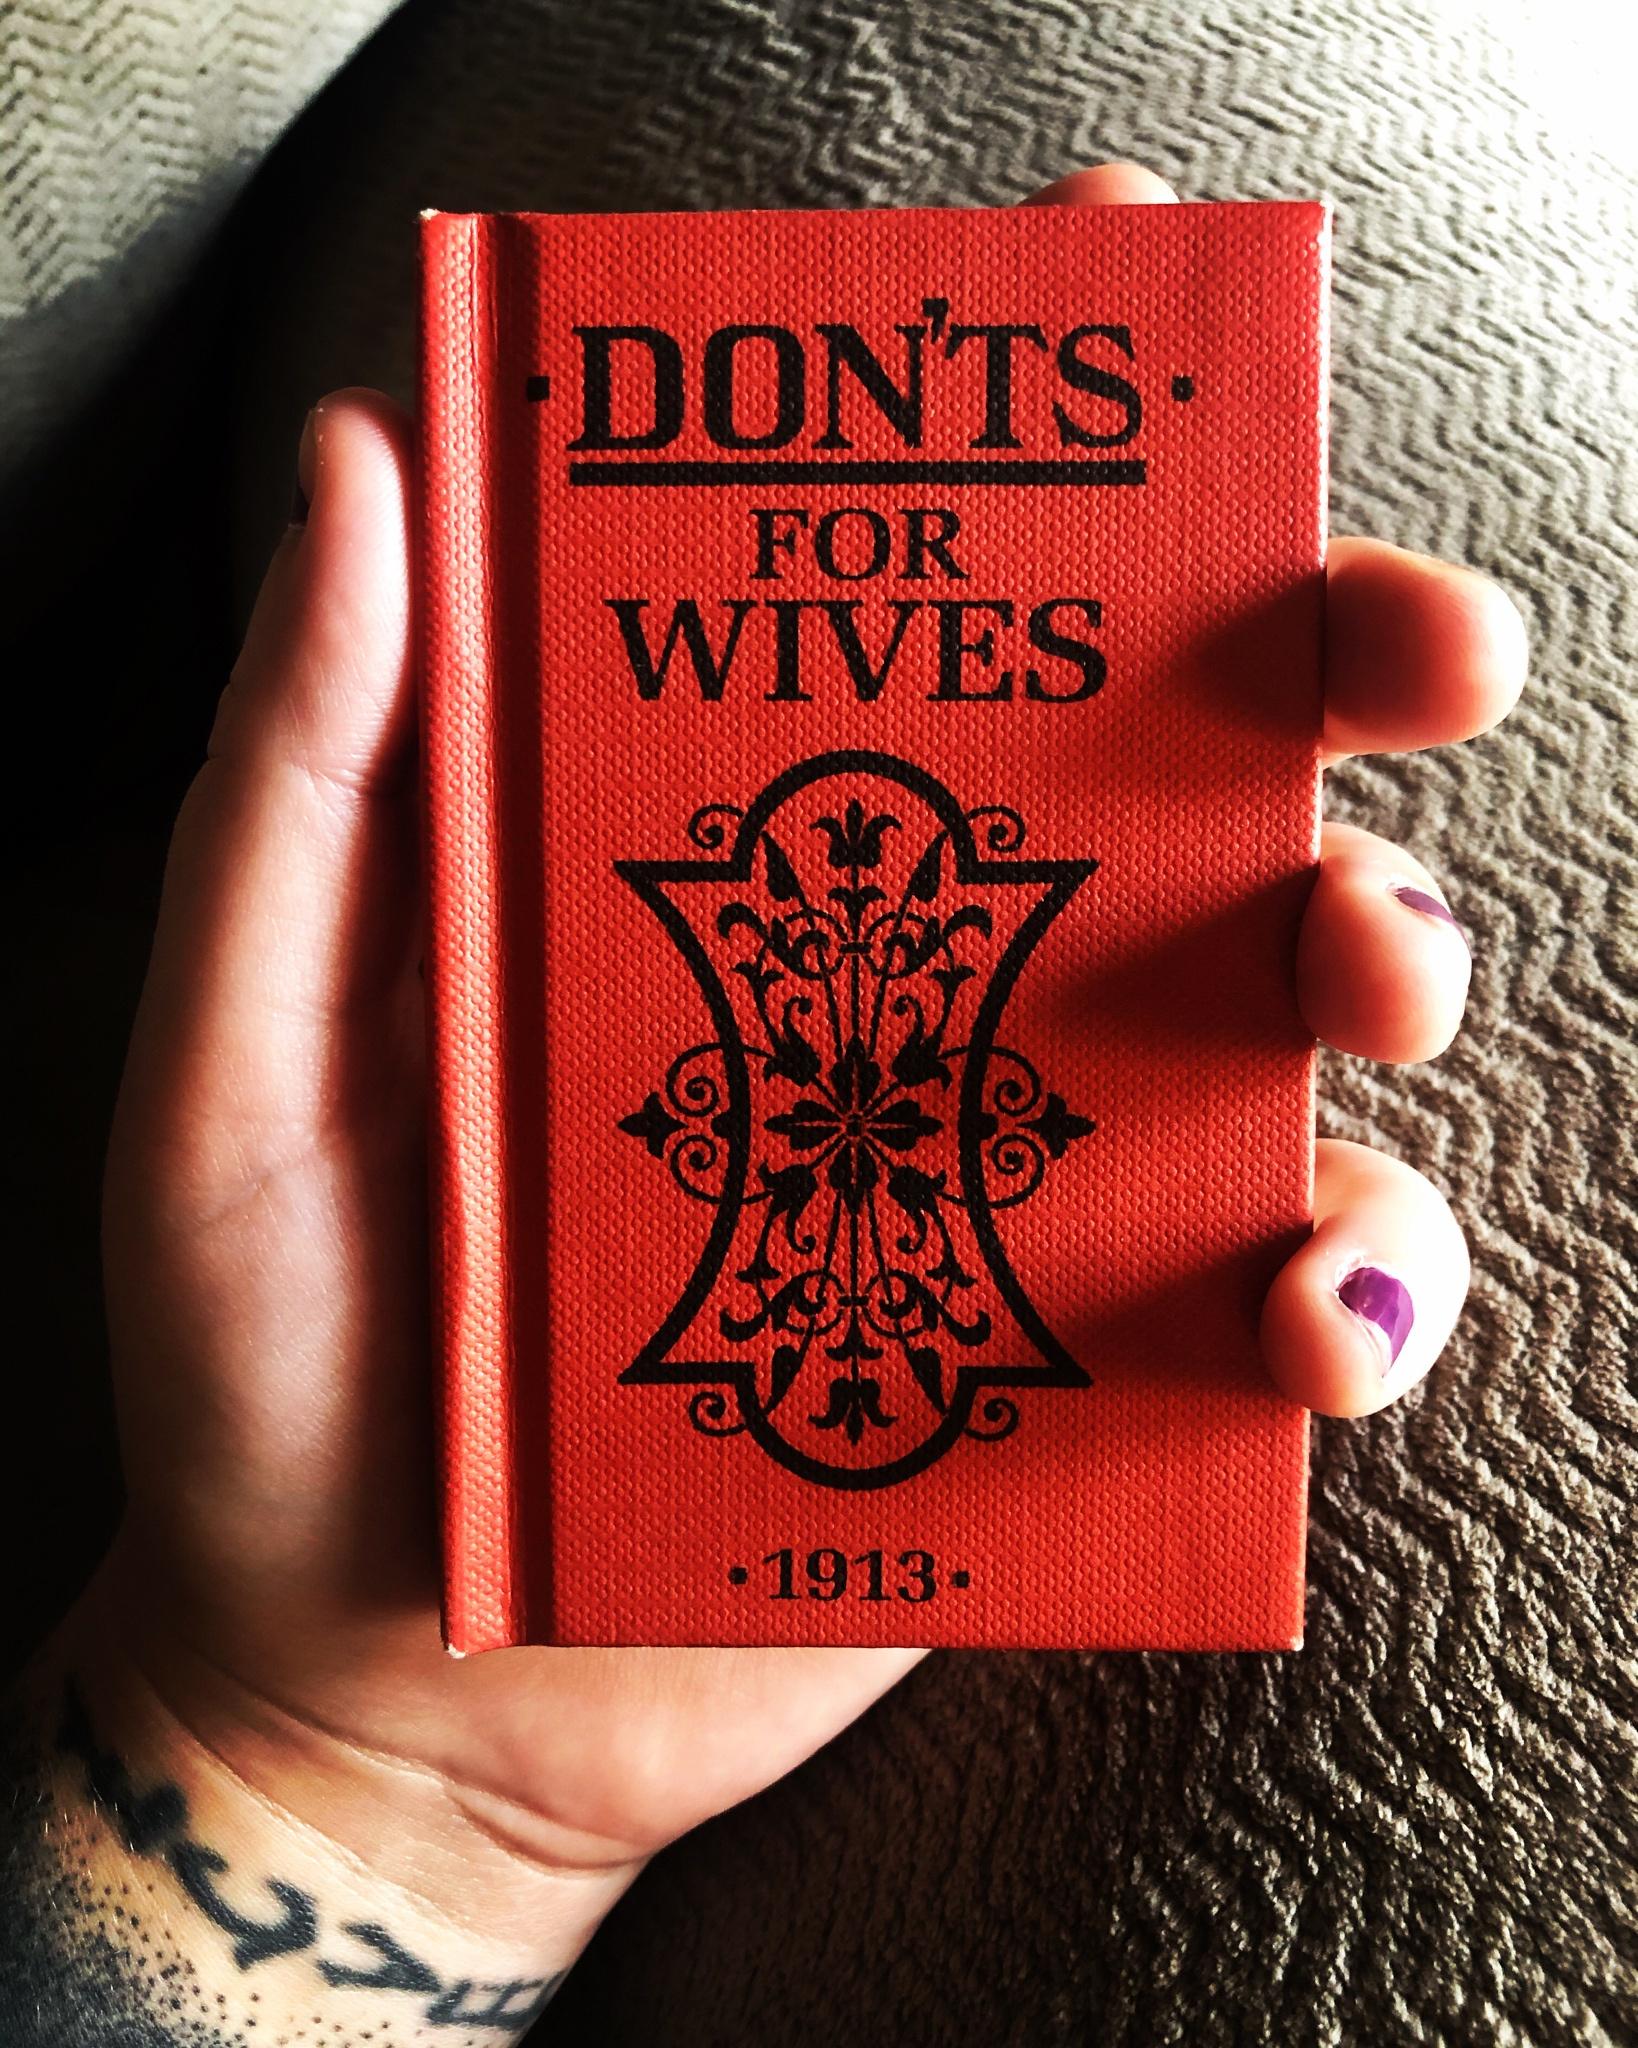 don ts for husbands - Donts For Wives Sh a 1913